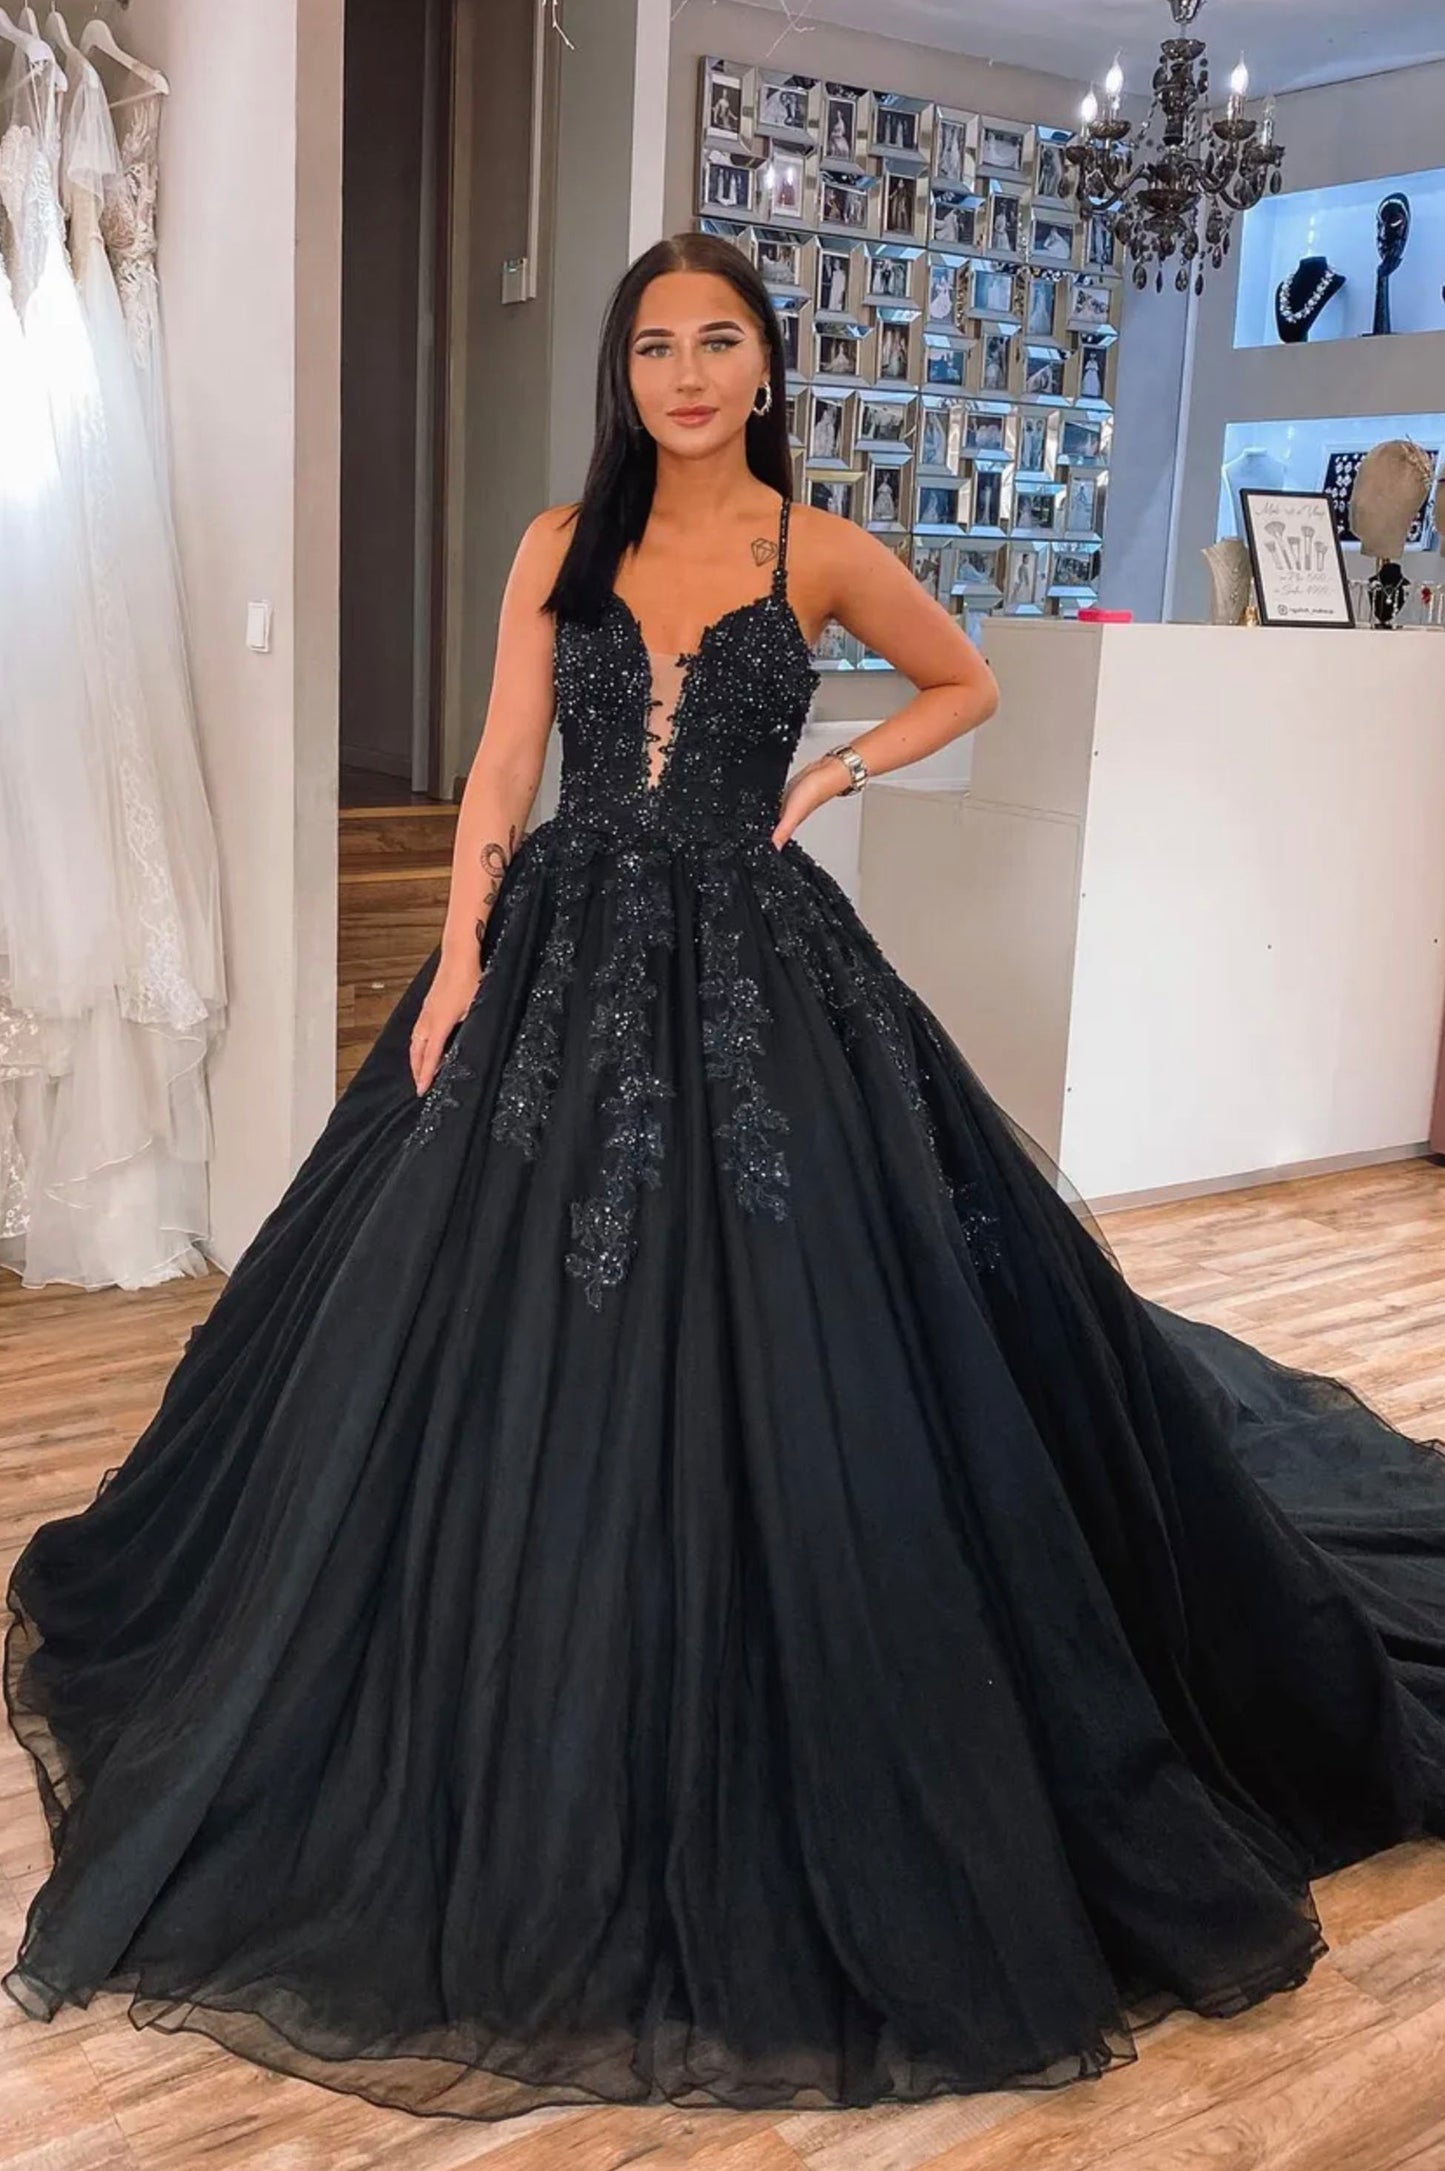 Black Spaghetti Strap Lace Long Prom Dress, Black A-Line Evening Gown